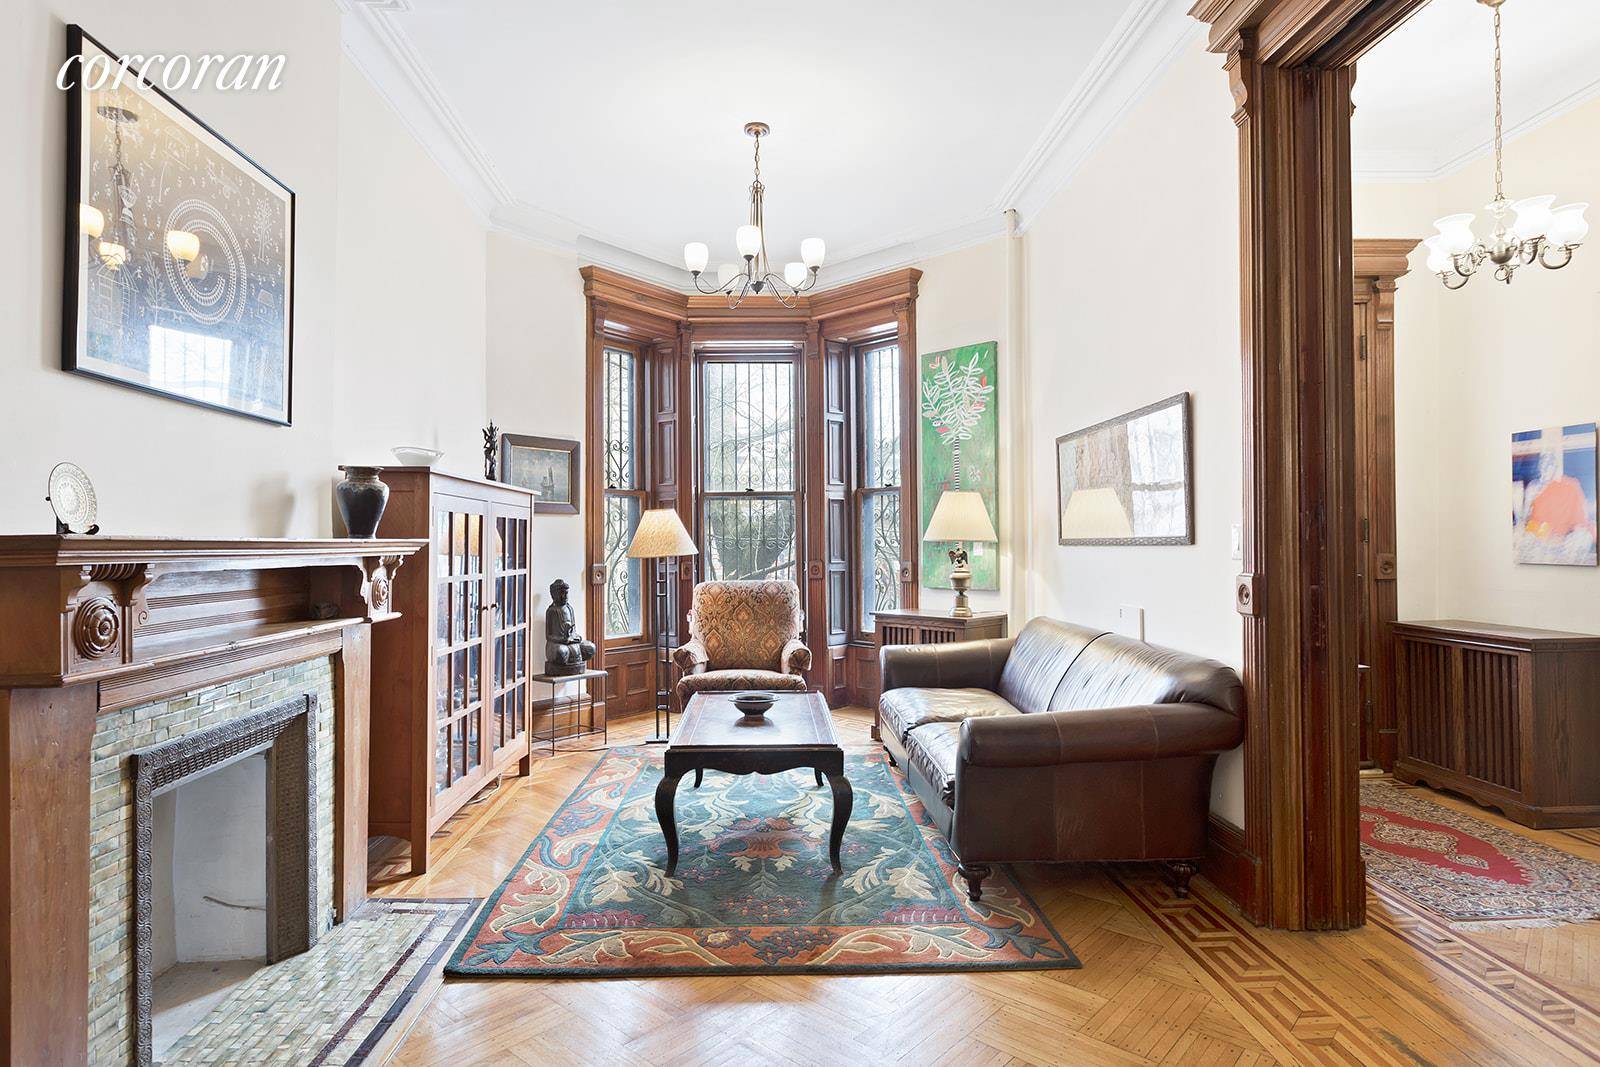 Located on a coveted tree lined street in the heart of Park Slope, 462 2nd Street is a beautiful 2 family brownstone loaded with charm and character.